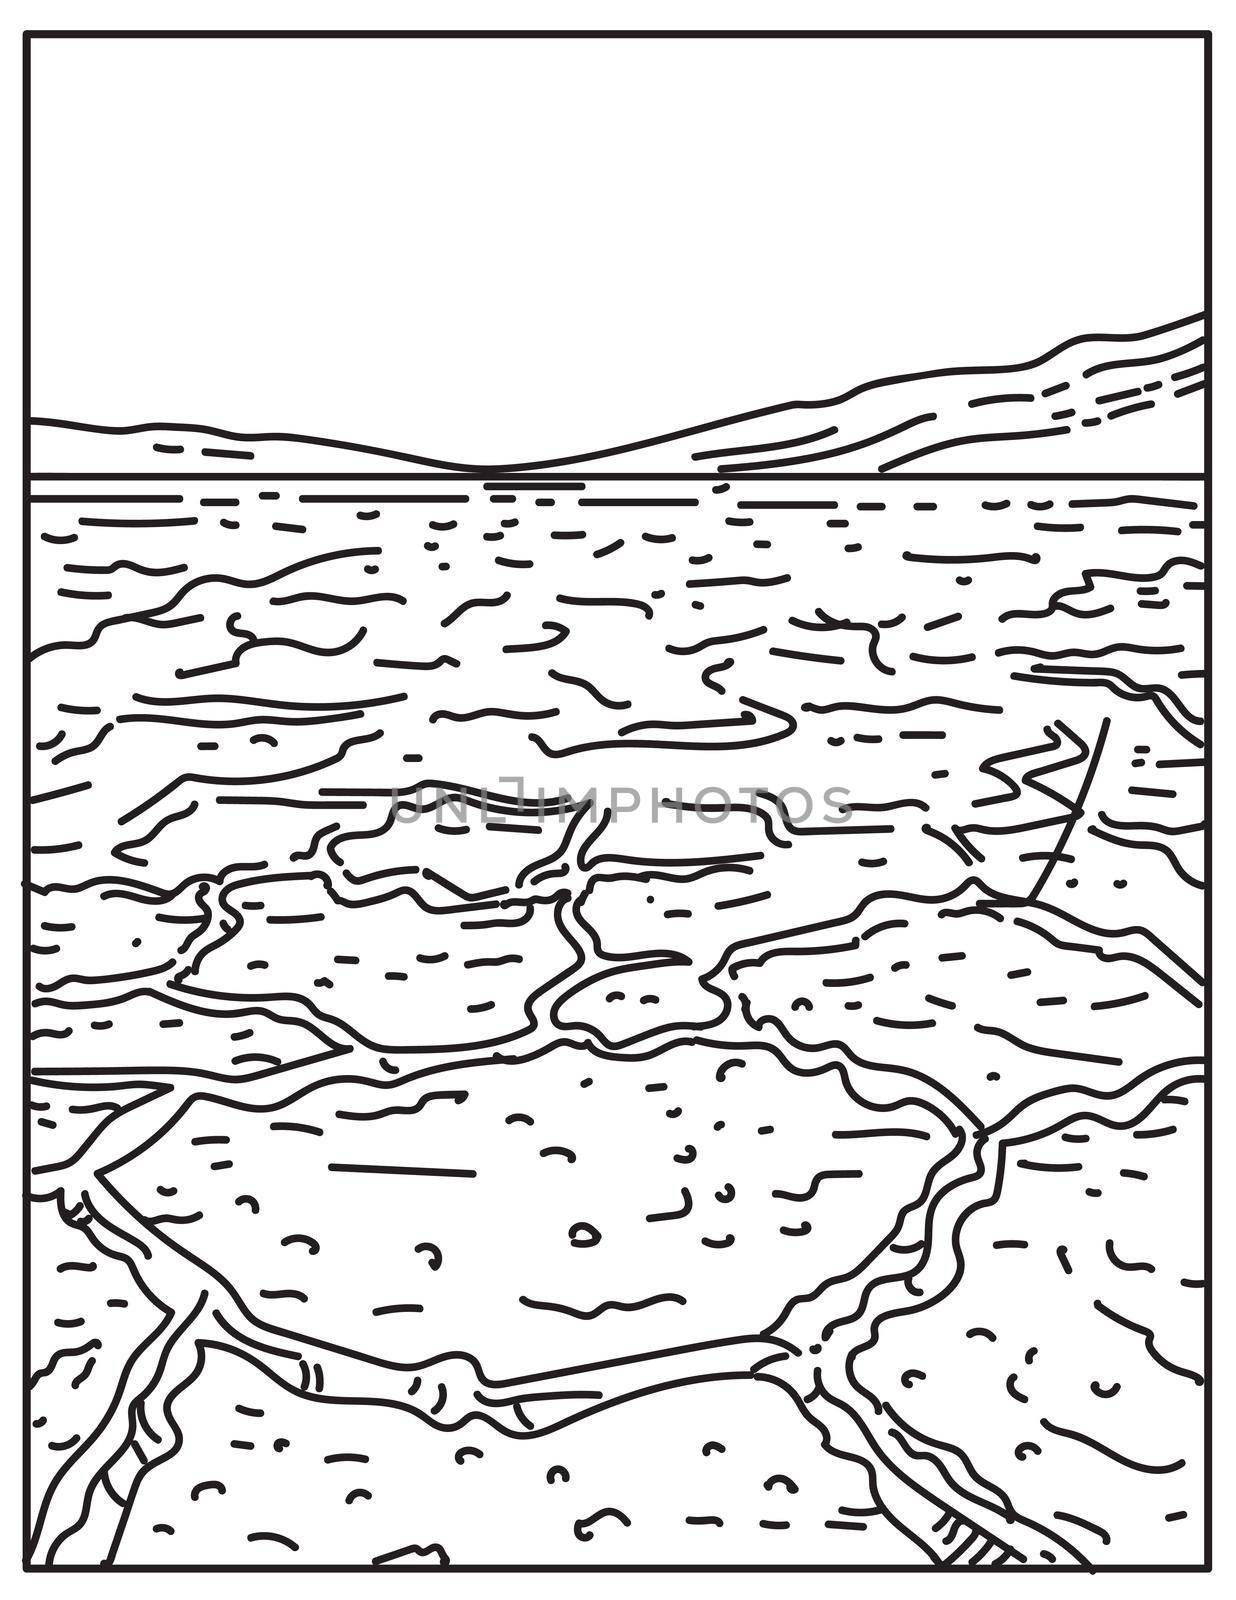 Mono line illustration of Badwater Basin in Death Valley National Park, Death Valley, Inyo County, California, United States of America done in retro black and white monoline line art style.